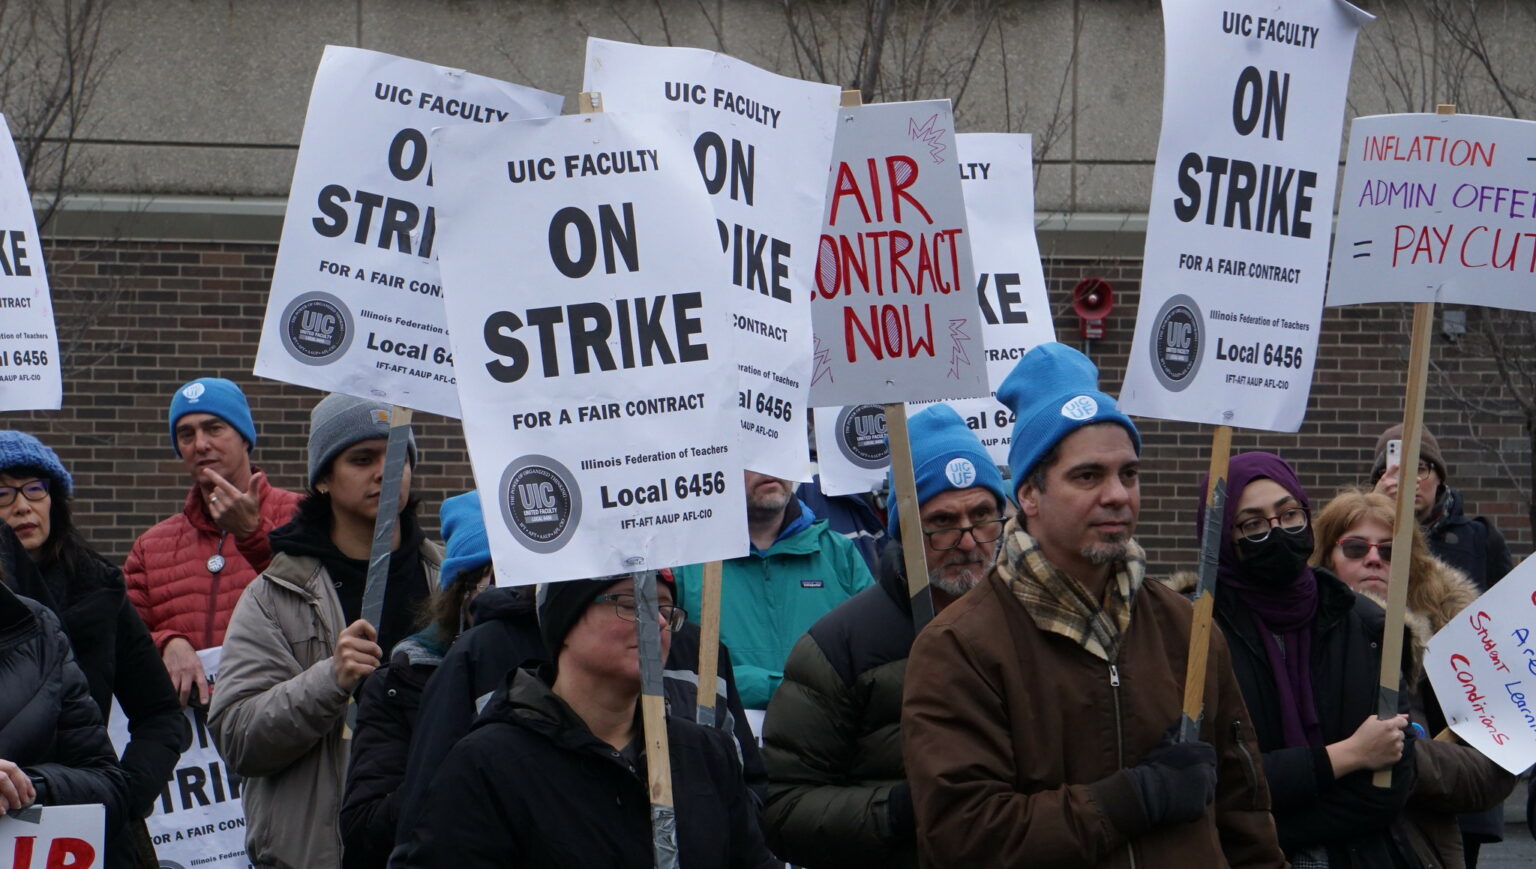 UIC Campus Unions Rally in Solidarity with Striking Faculty - SEIU Local 73